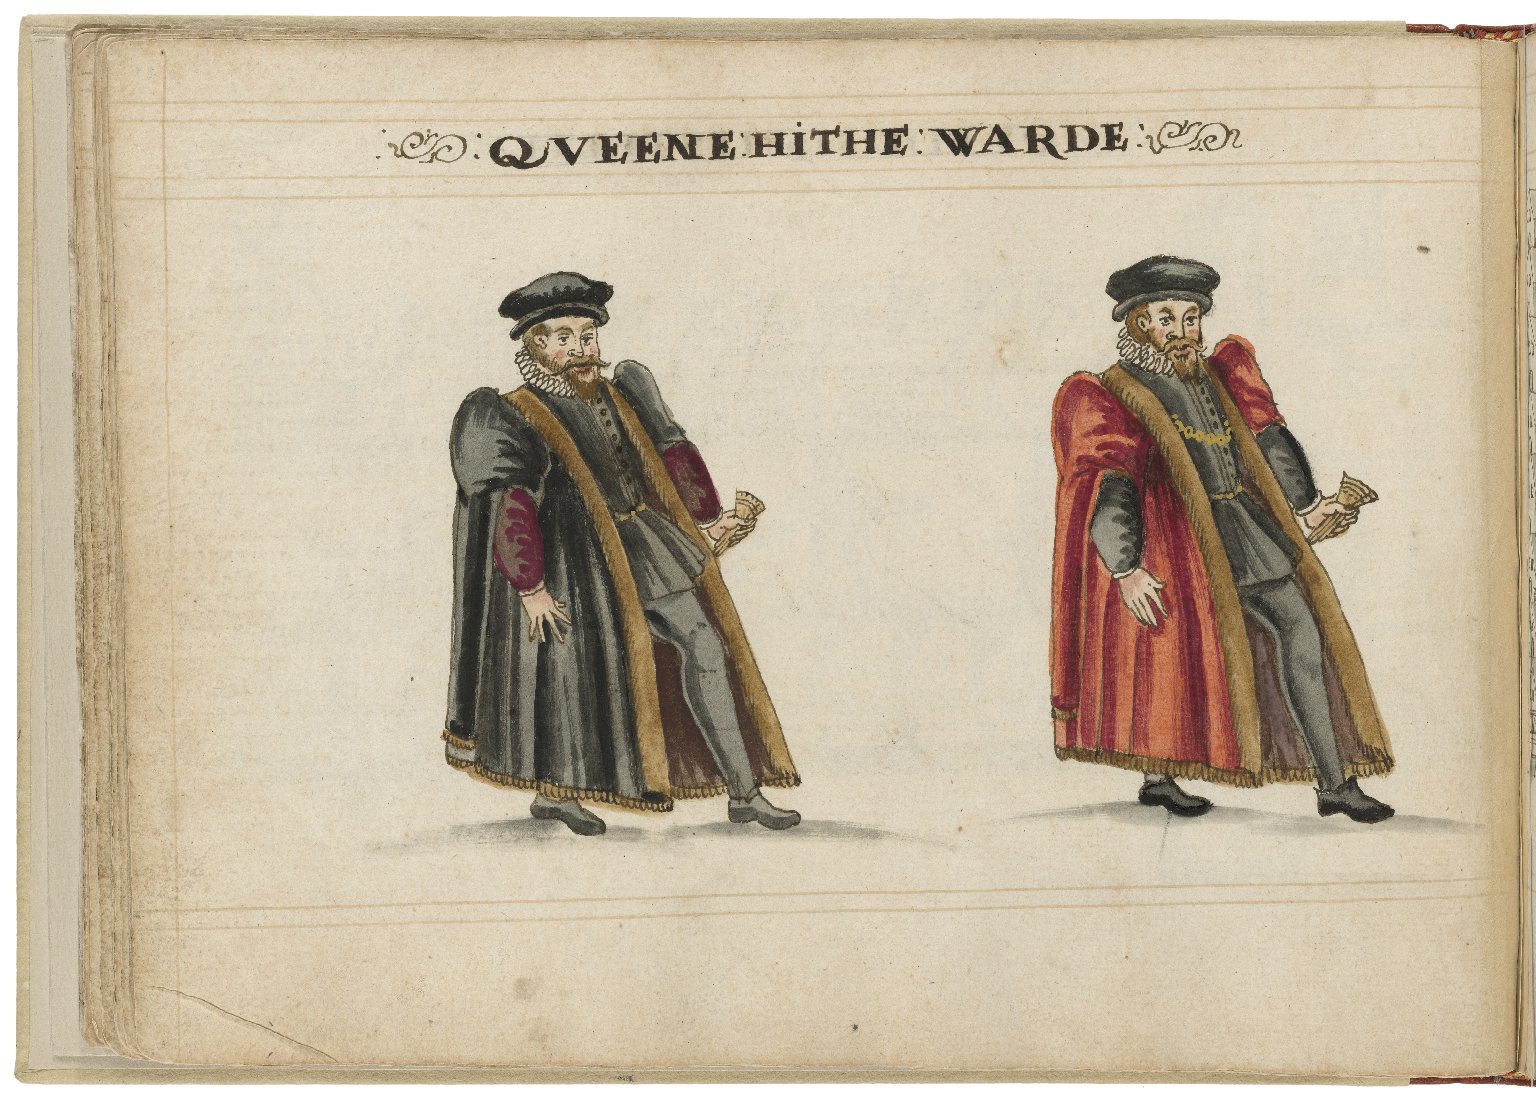 Watercolour painting of the alderman and deputy in charge of Queenhithe Ward by Hugh Alley. Image courtesy of the Folger Digital Image Collection.